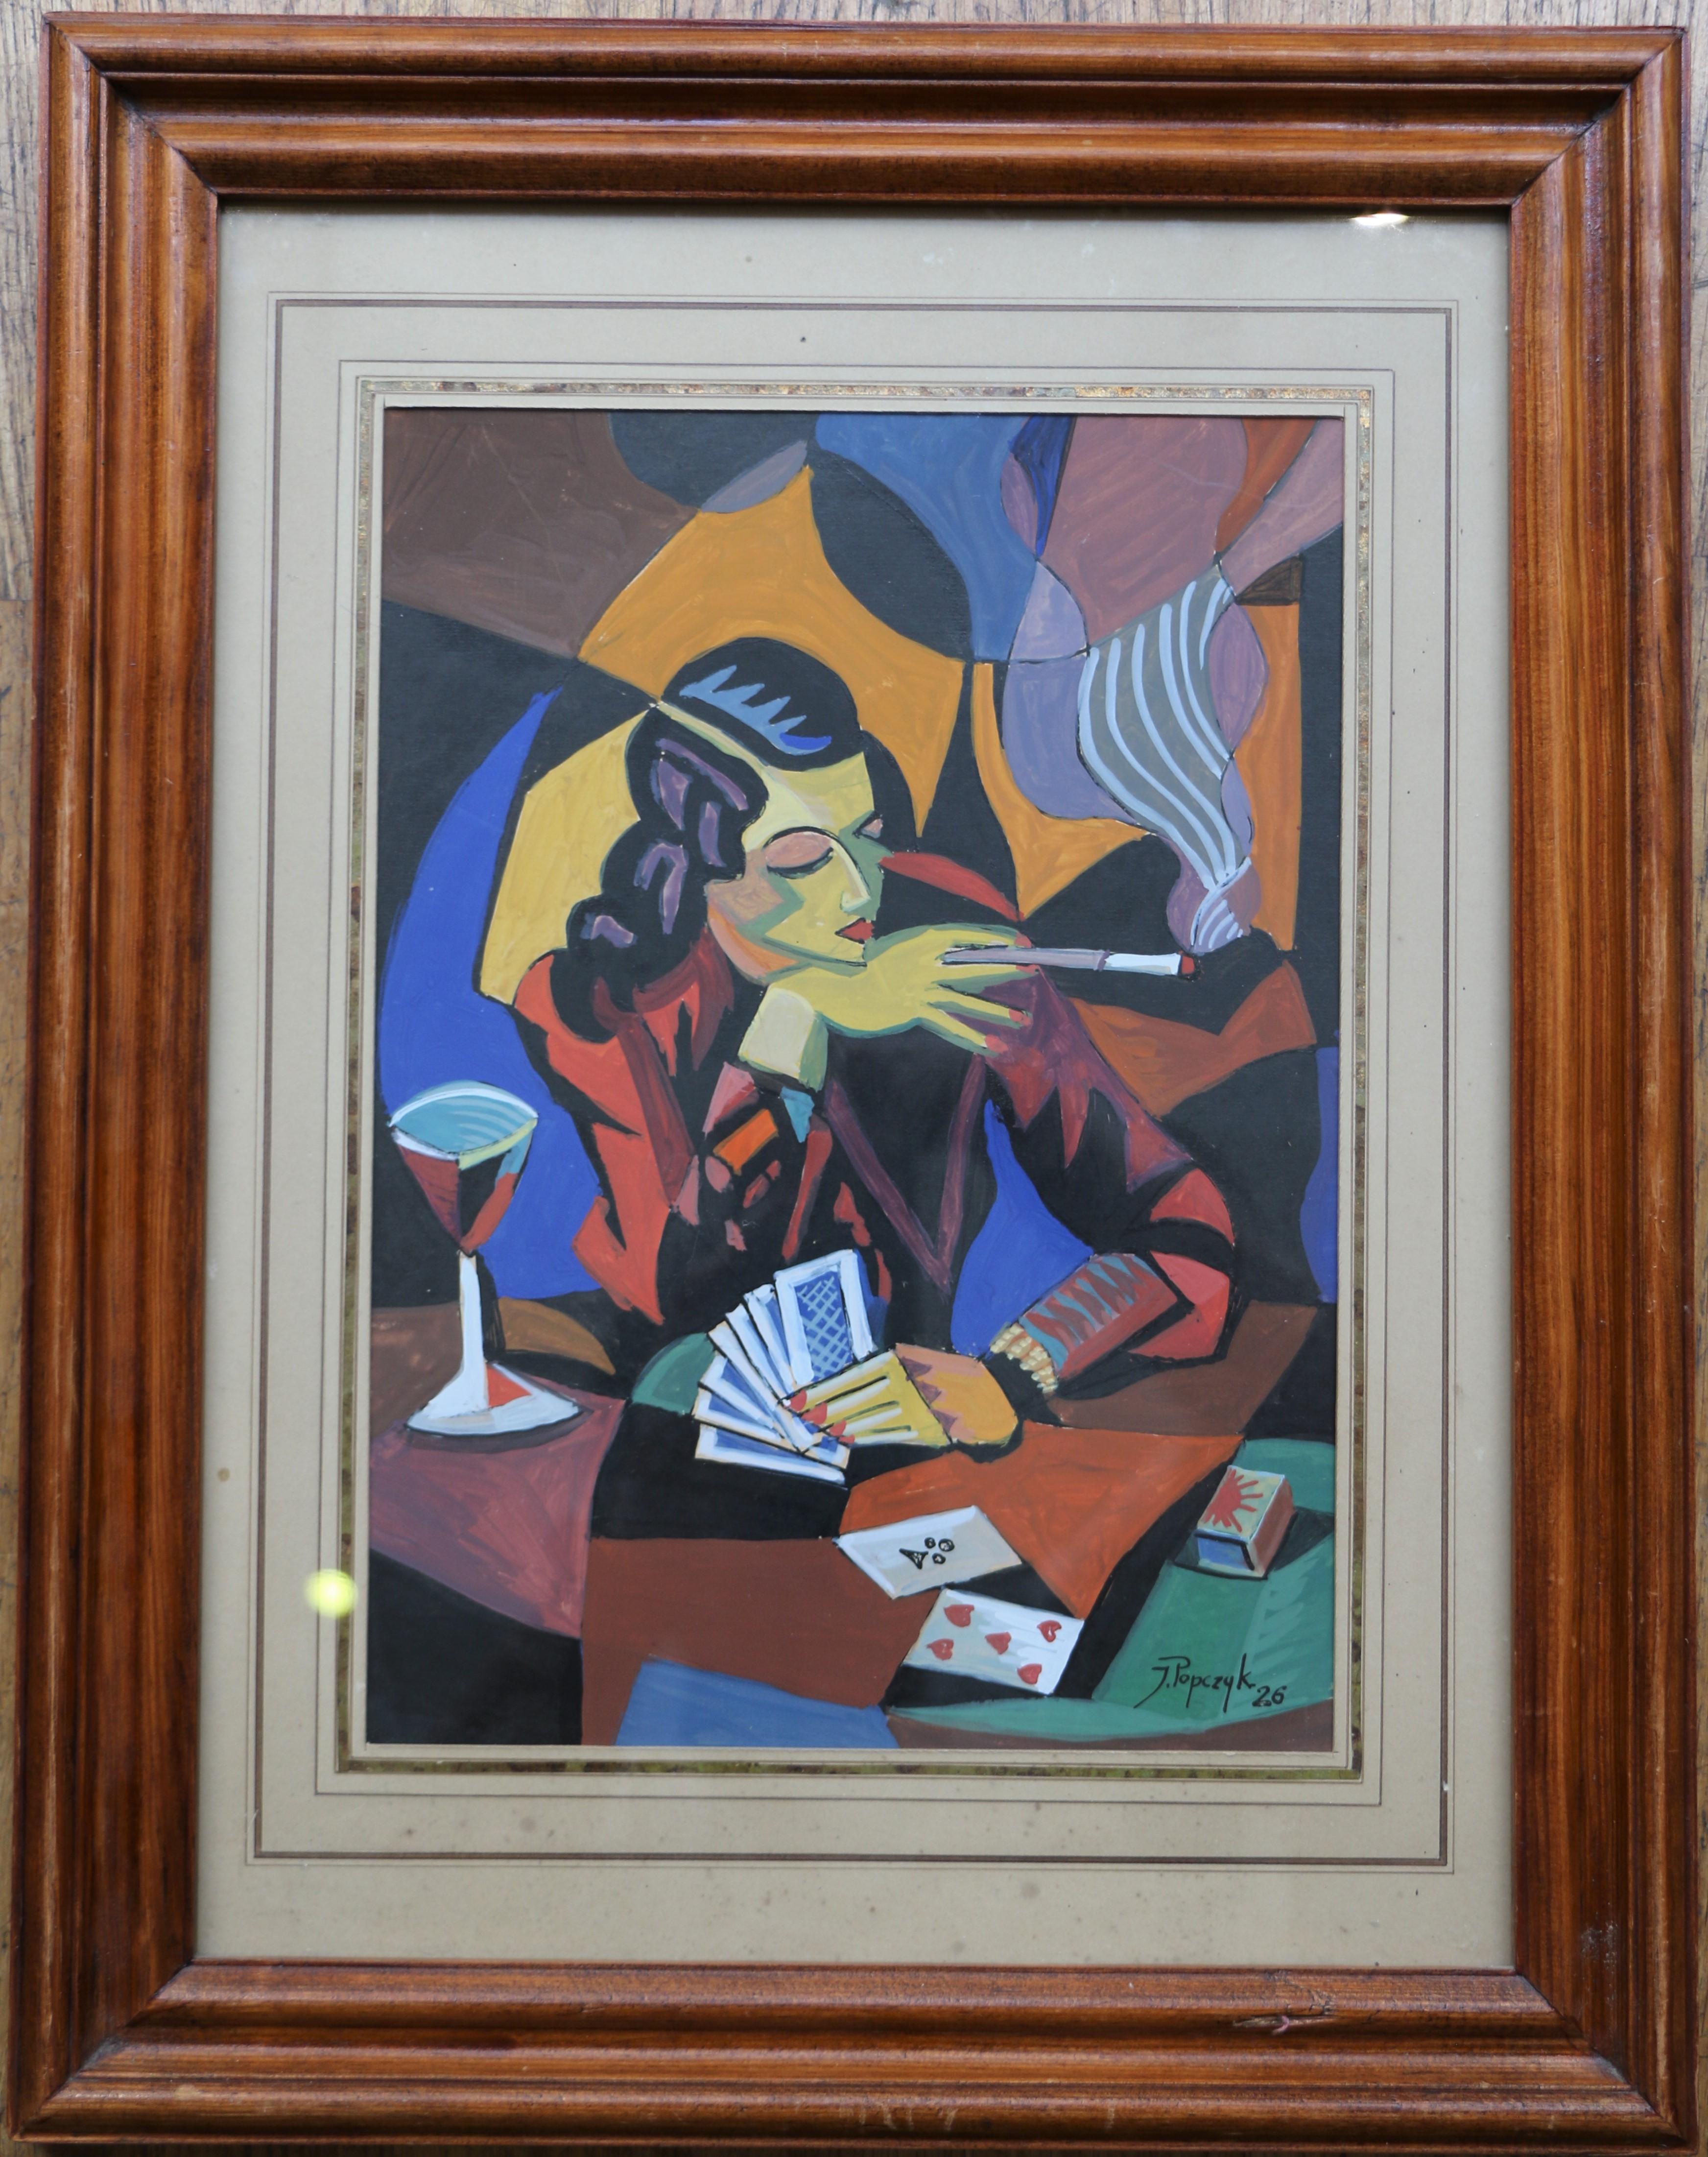 A beautiful cubist watercolor on paper by Jozef Popczyk showing a woman playing cards. It is signed and dated 1926 at the bottom right. Framed.
Dimensions: at sight without frame 29.5 x 21 cm; With frame: 46.5 x 36cm.